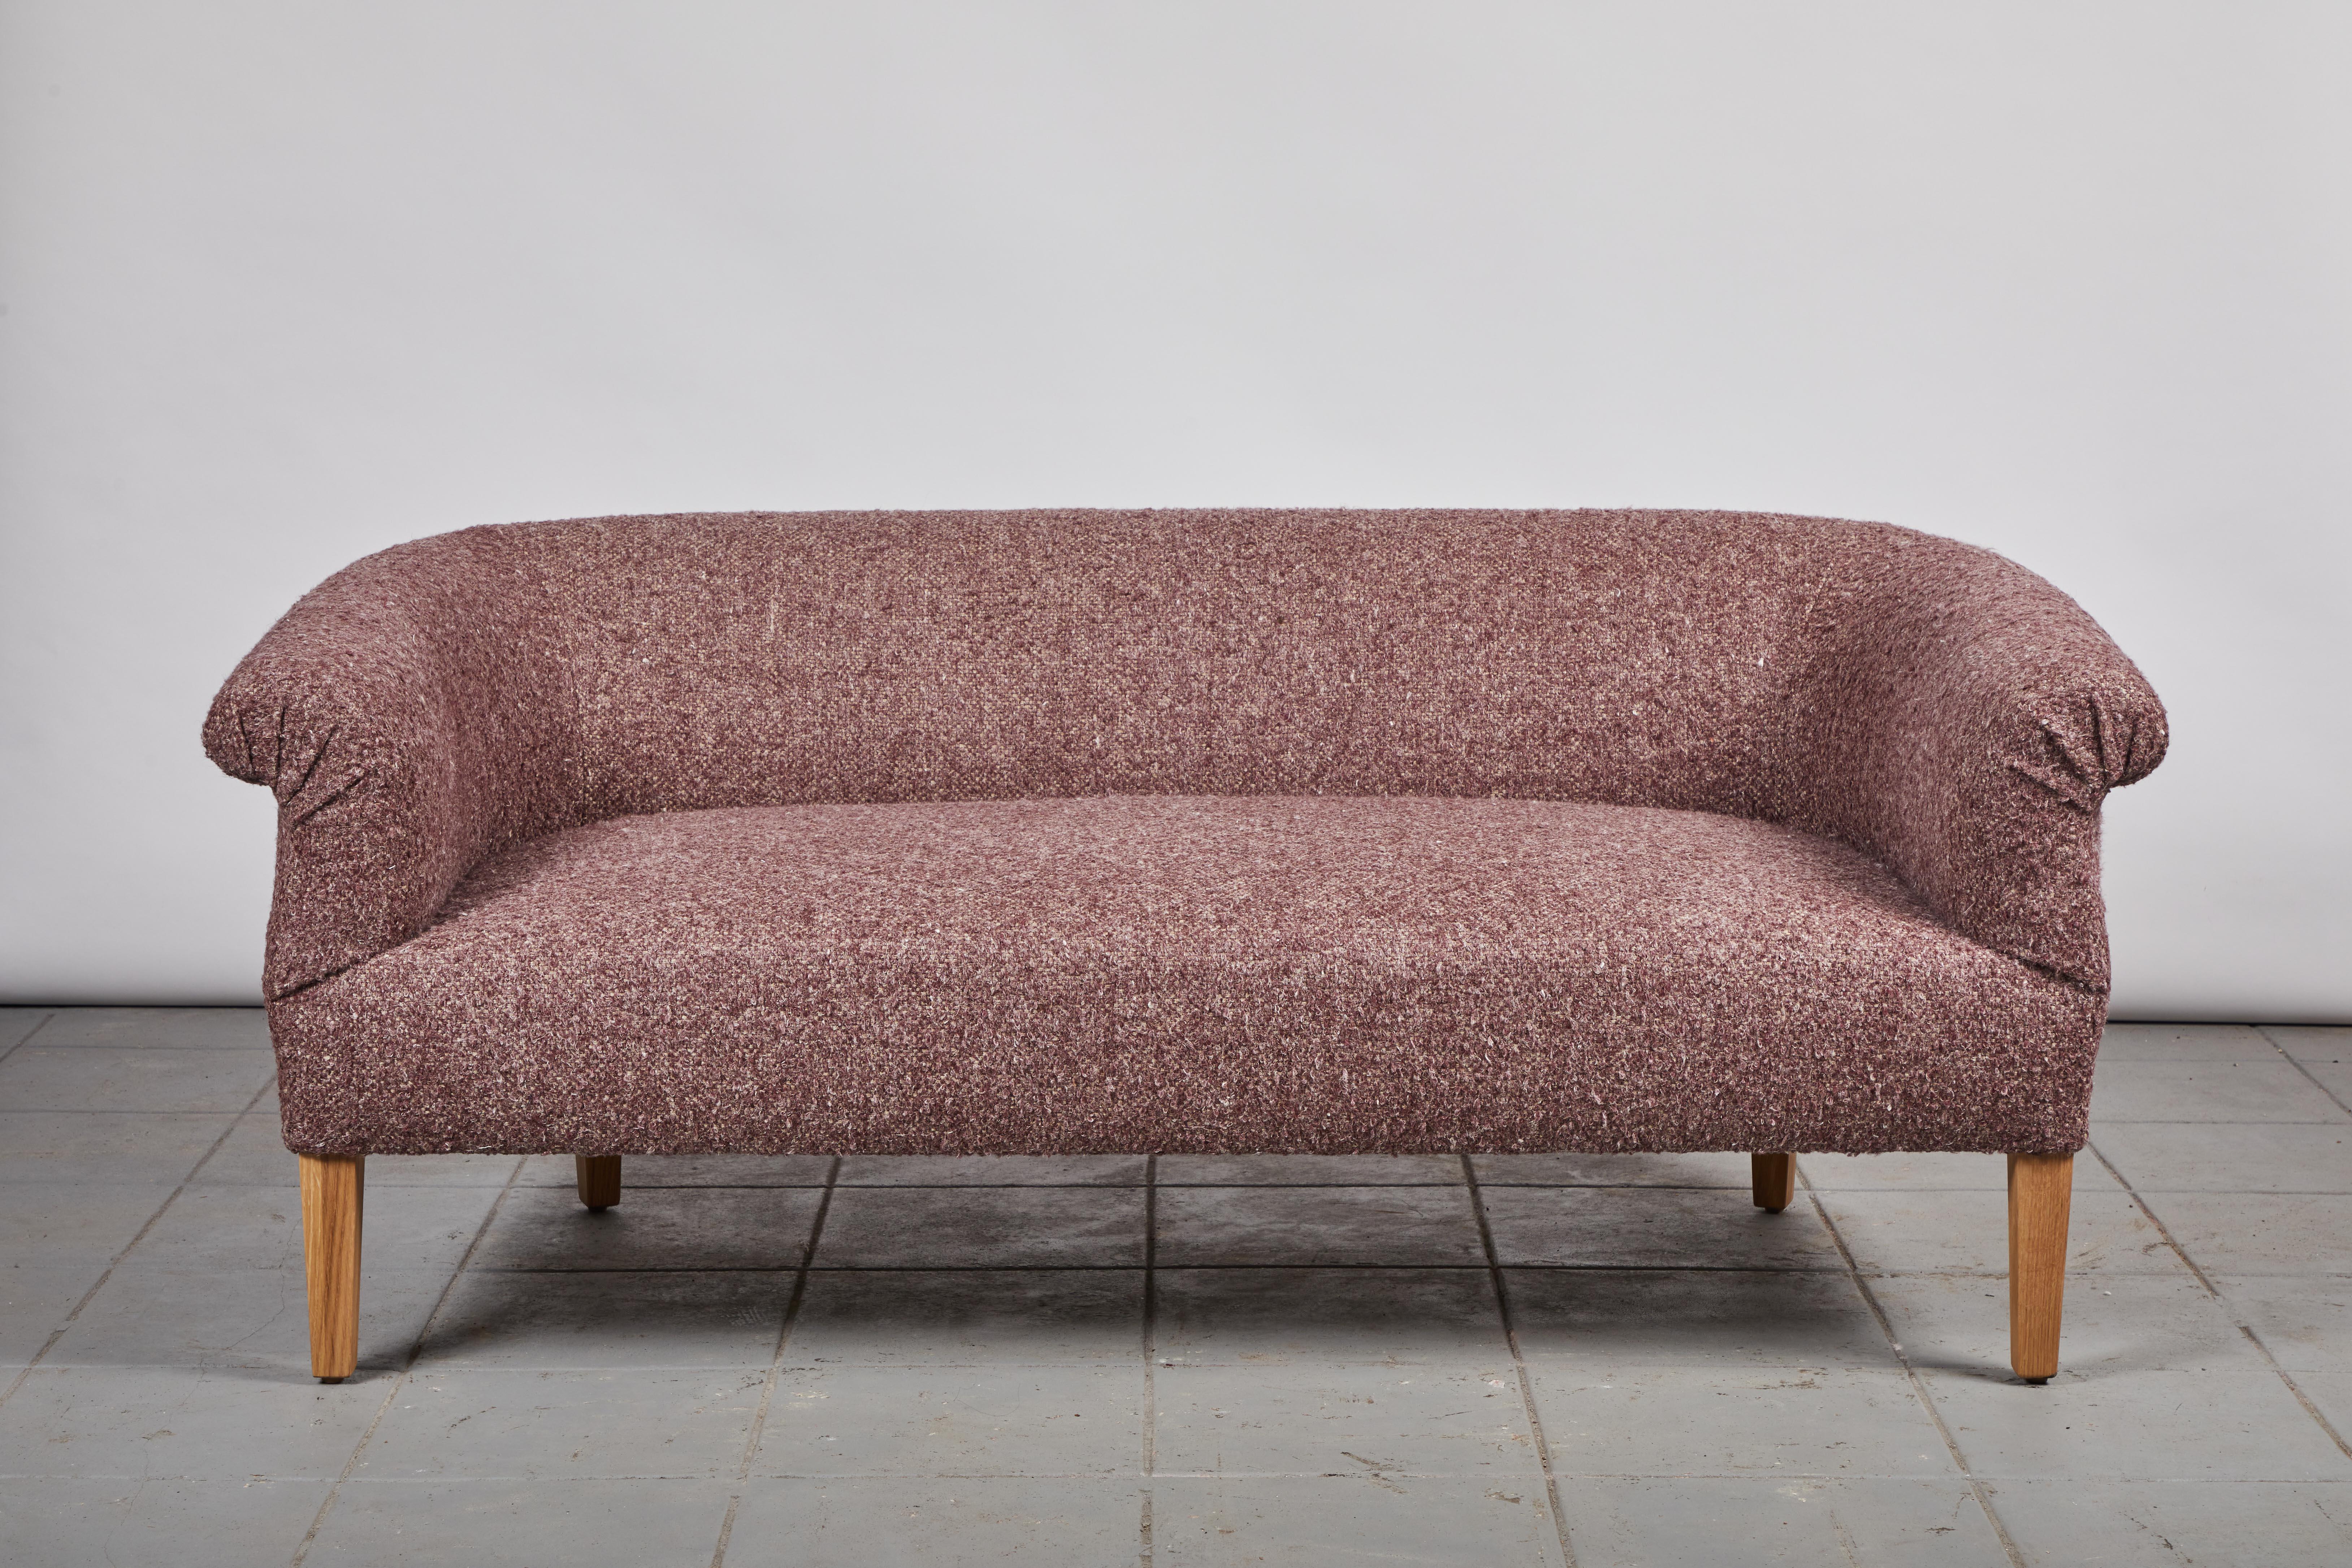 This comfortable and elegant settee showcases old-world design paired with a contemporary sensibility. Perfect for the end of a bed or under a window, this beauty is versatile and elevated. This specific settee is upholstered in a merlot colored